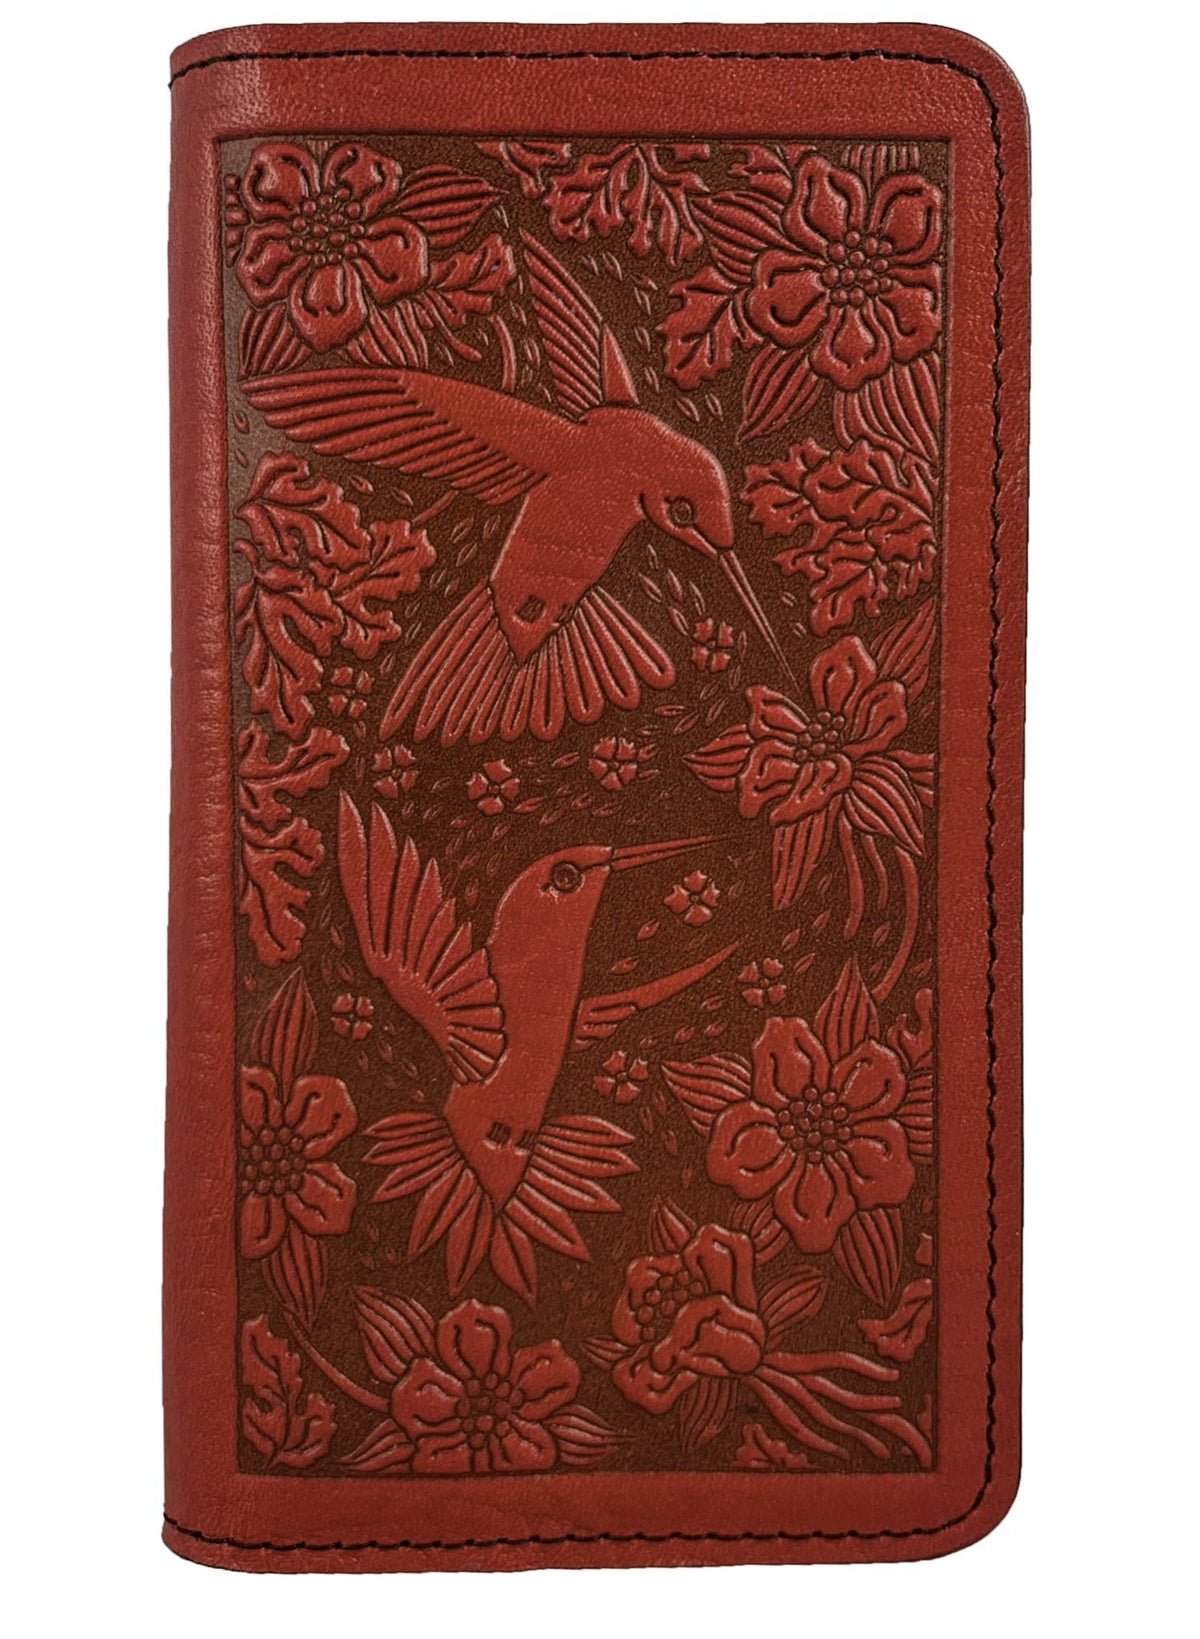 Oberon Design Small Oberon Design Small Leather Smartphone Wallet Case, Hummingbirds in Red